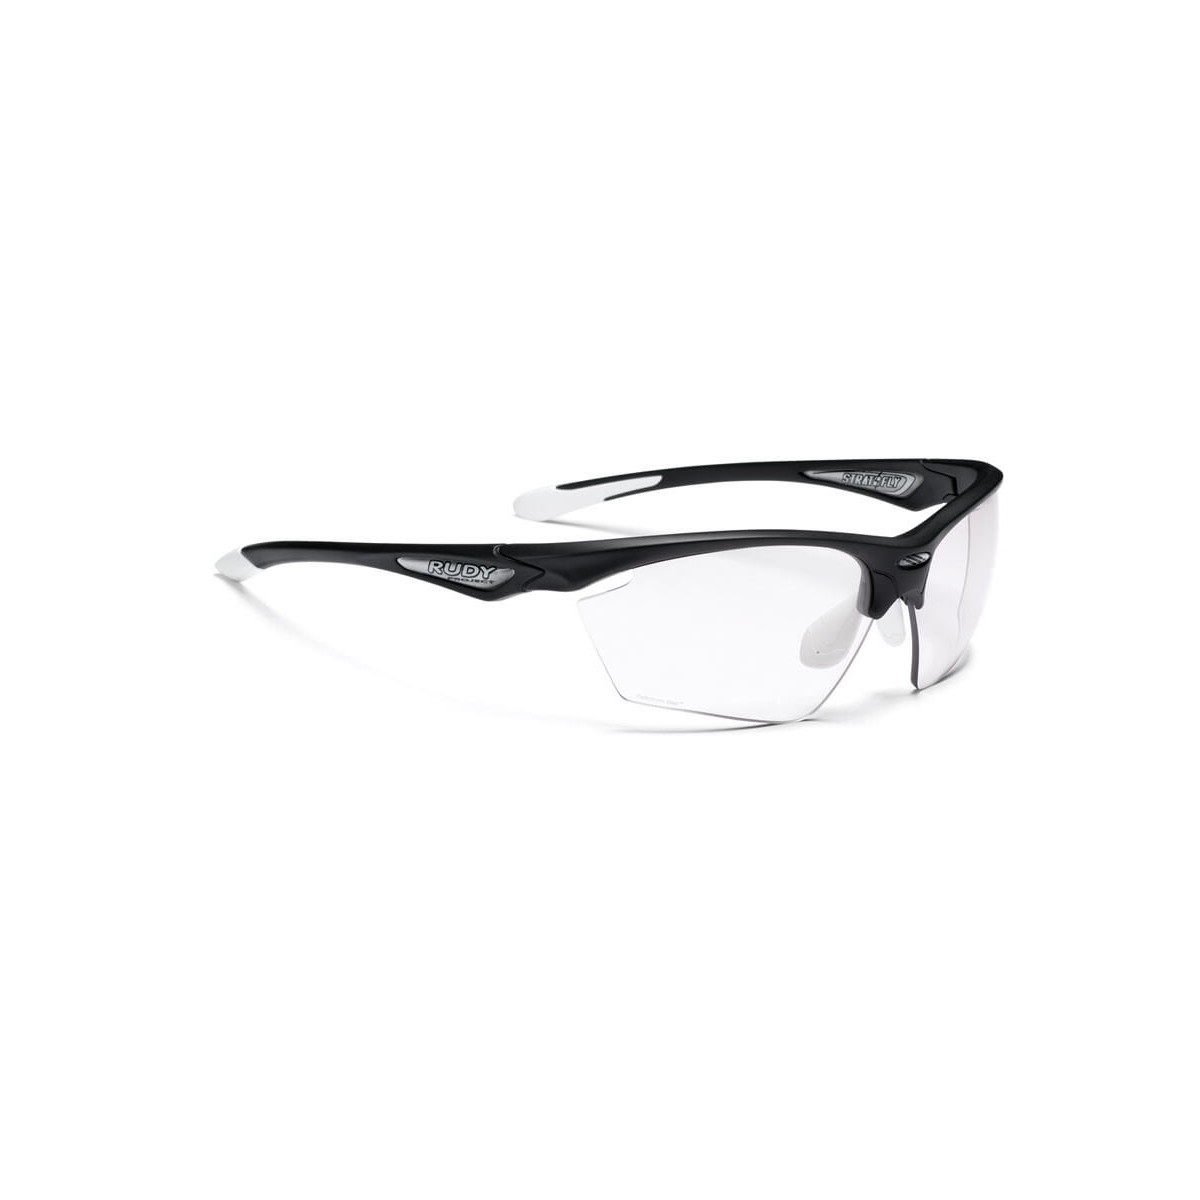 of a günstig Kaufen-Brille Stratofly Black Gloss RPO Photoclear Rudy Project. Brille Stratofly Black Gloss RPO Photoclear Rudy Project . 